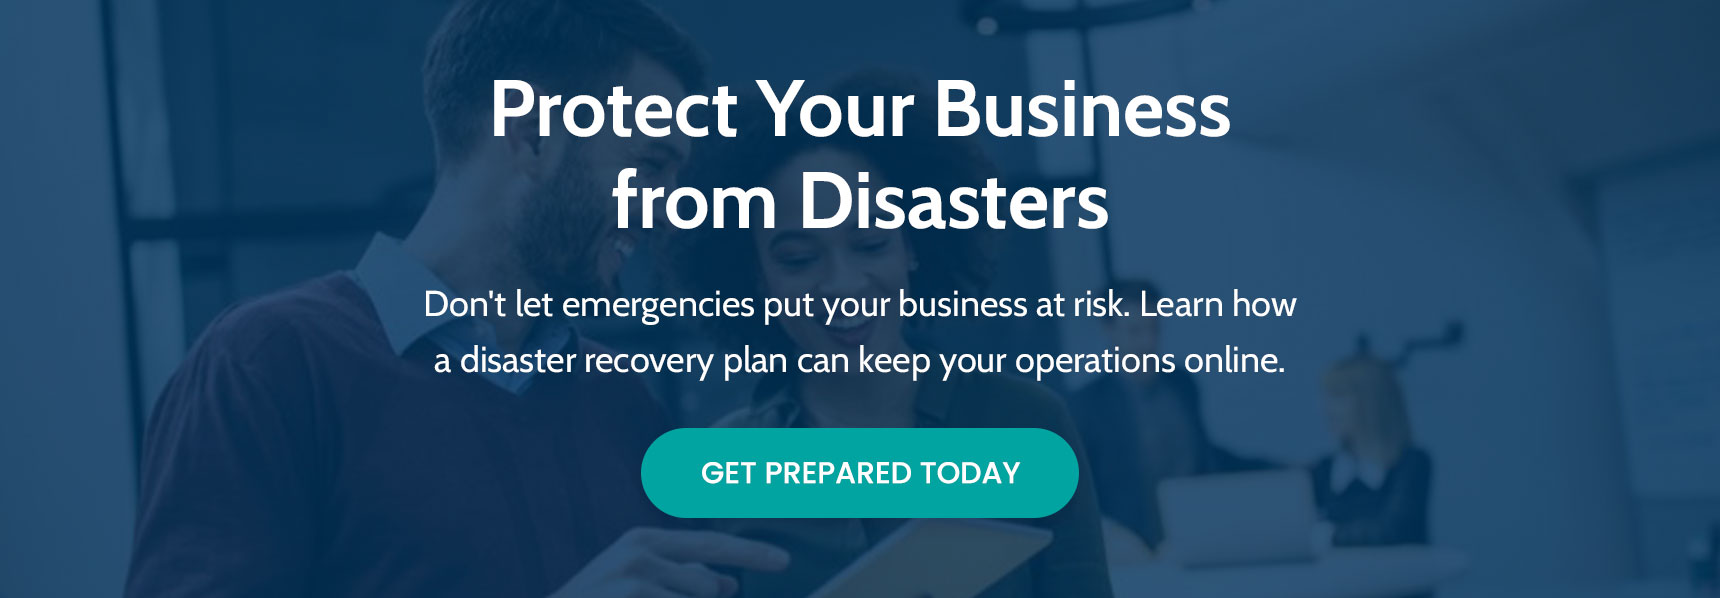 Don't let emergencies put your business at risk. Learn how a disaster recovery plan can keep your operations online.